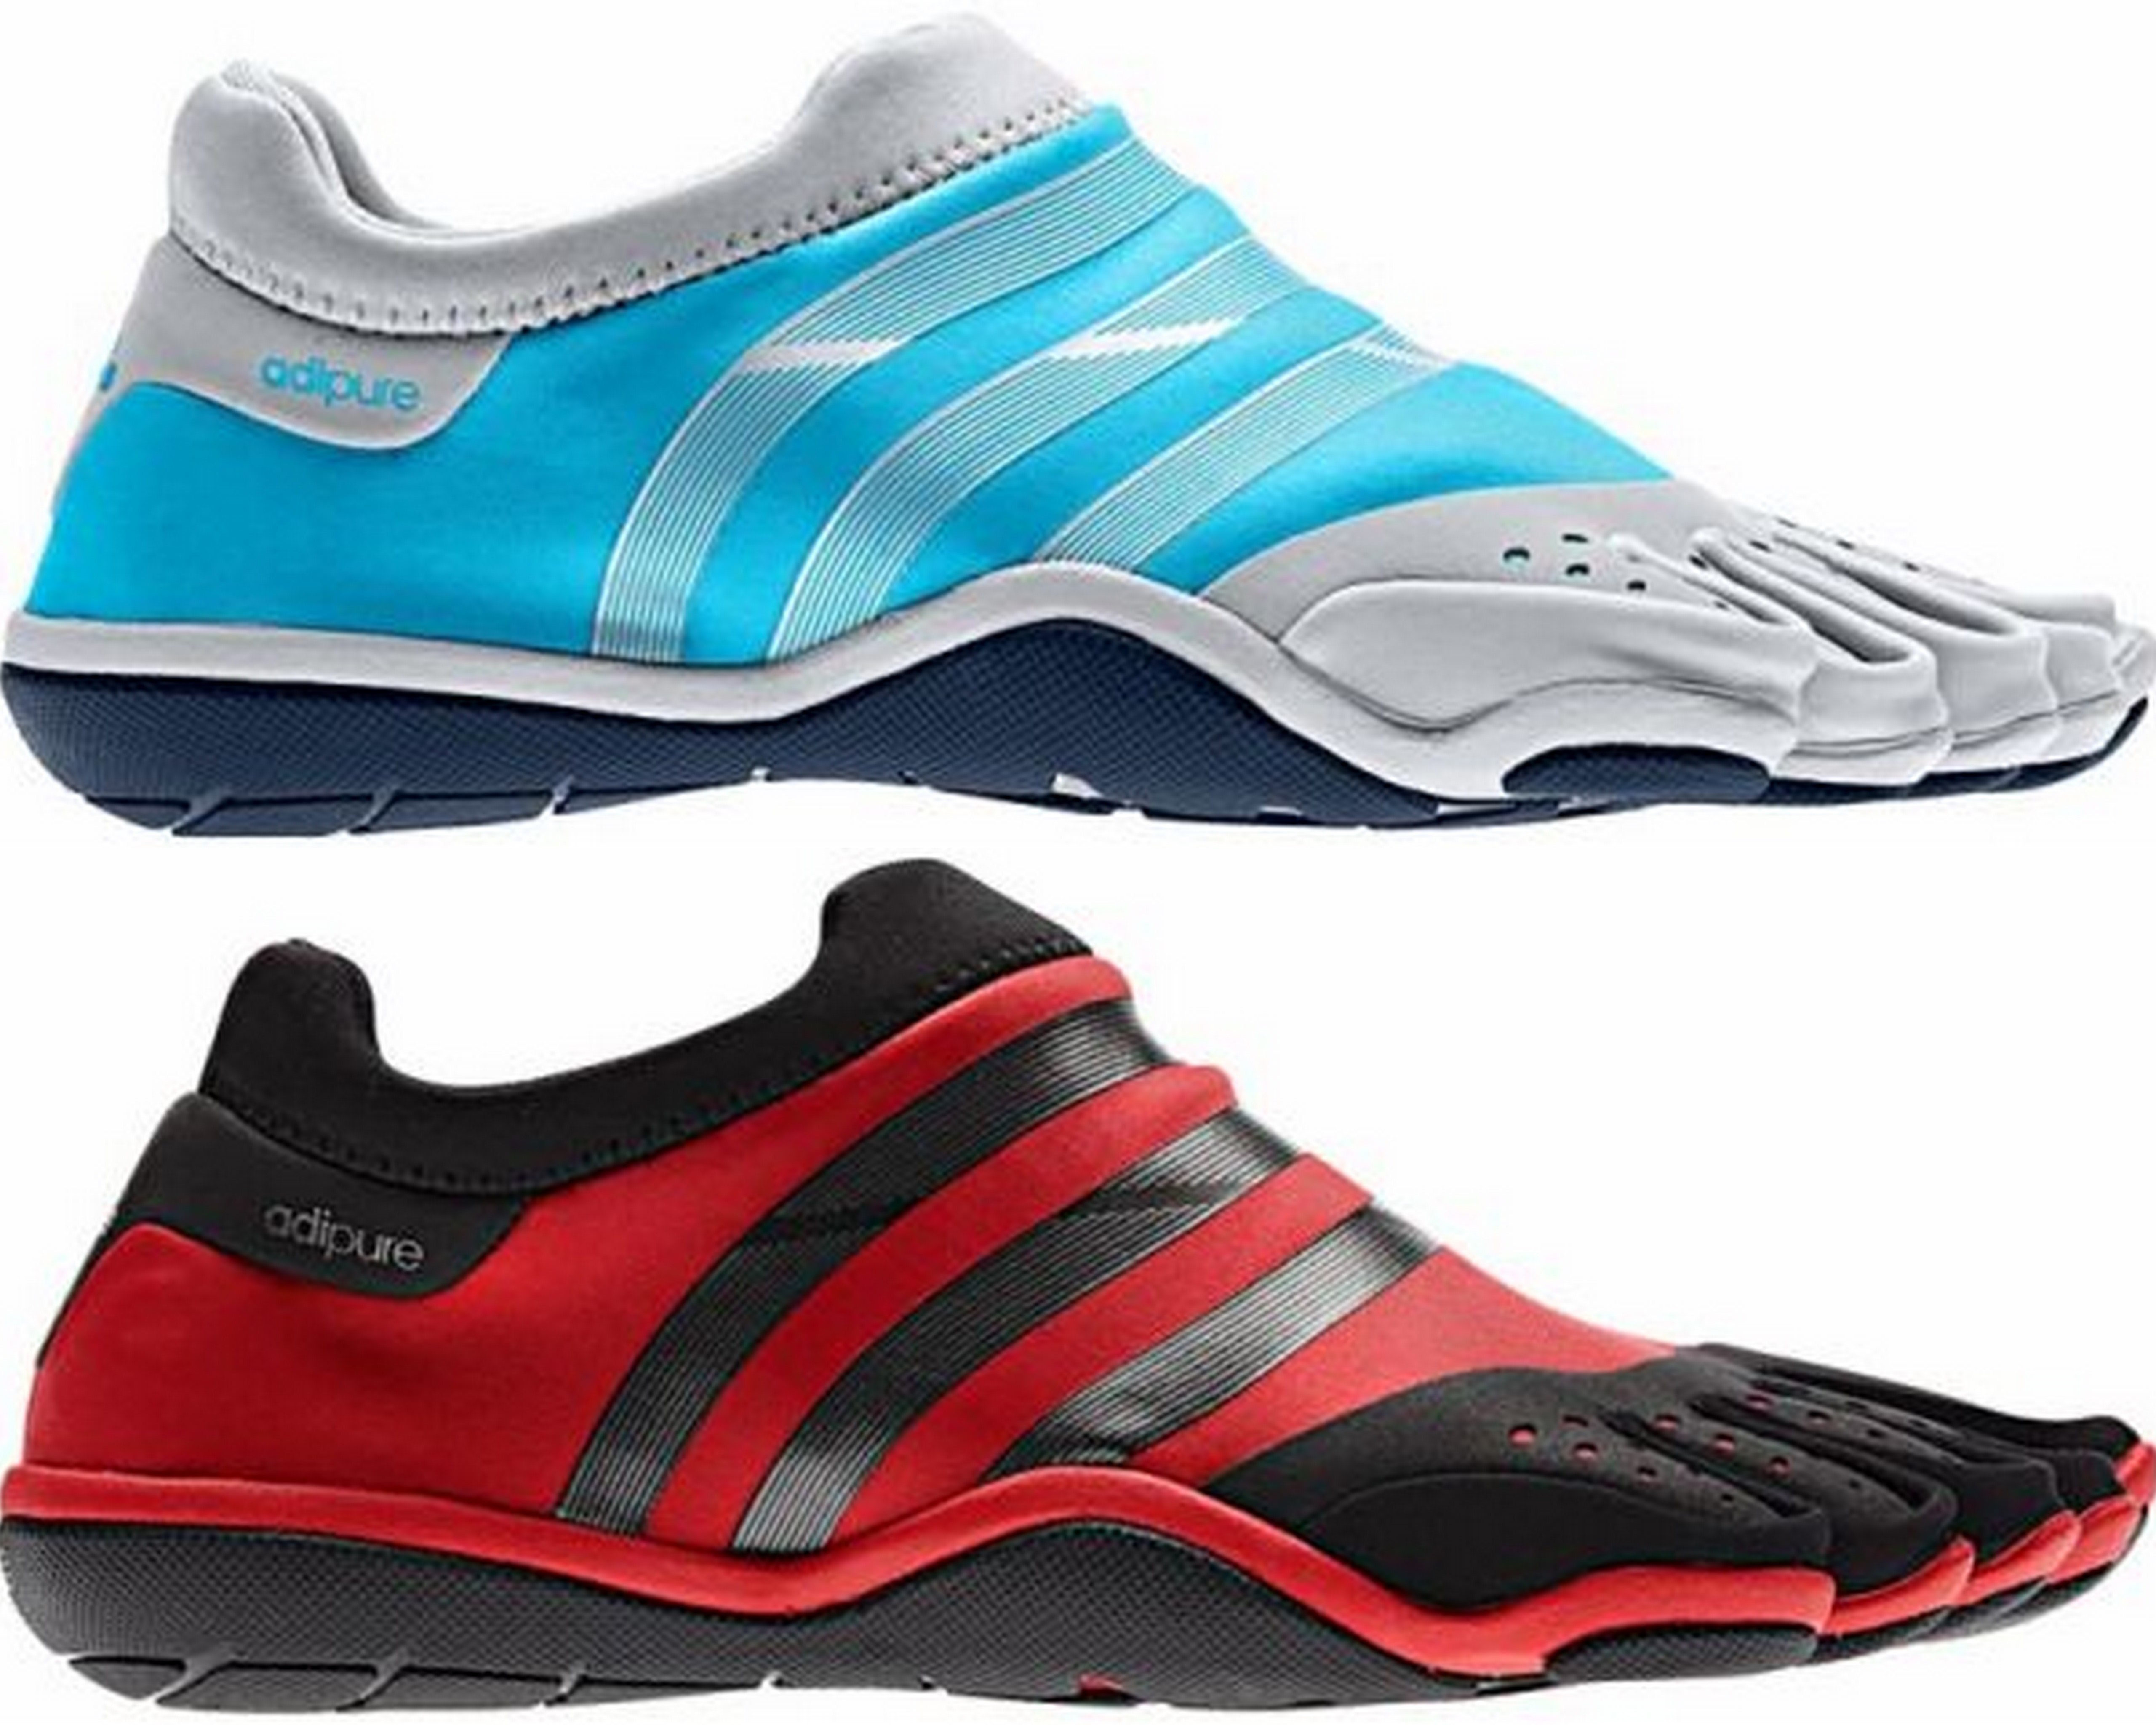 Adidas Shoes? Meet the AdiPure Trainer Barefoot Shoe - Birthday Shoes - Toe Shoes, Barefoot or Minimalist Shoes, and Vibram FiveFingers Reviews, News, Forums